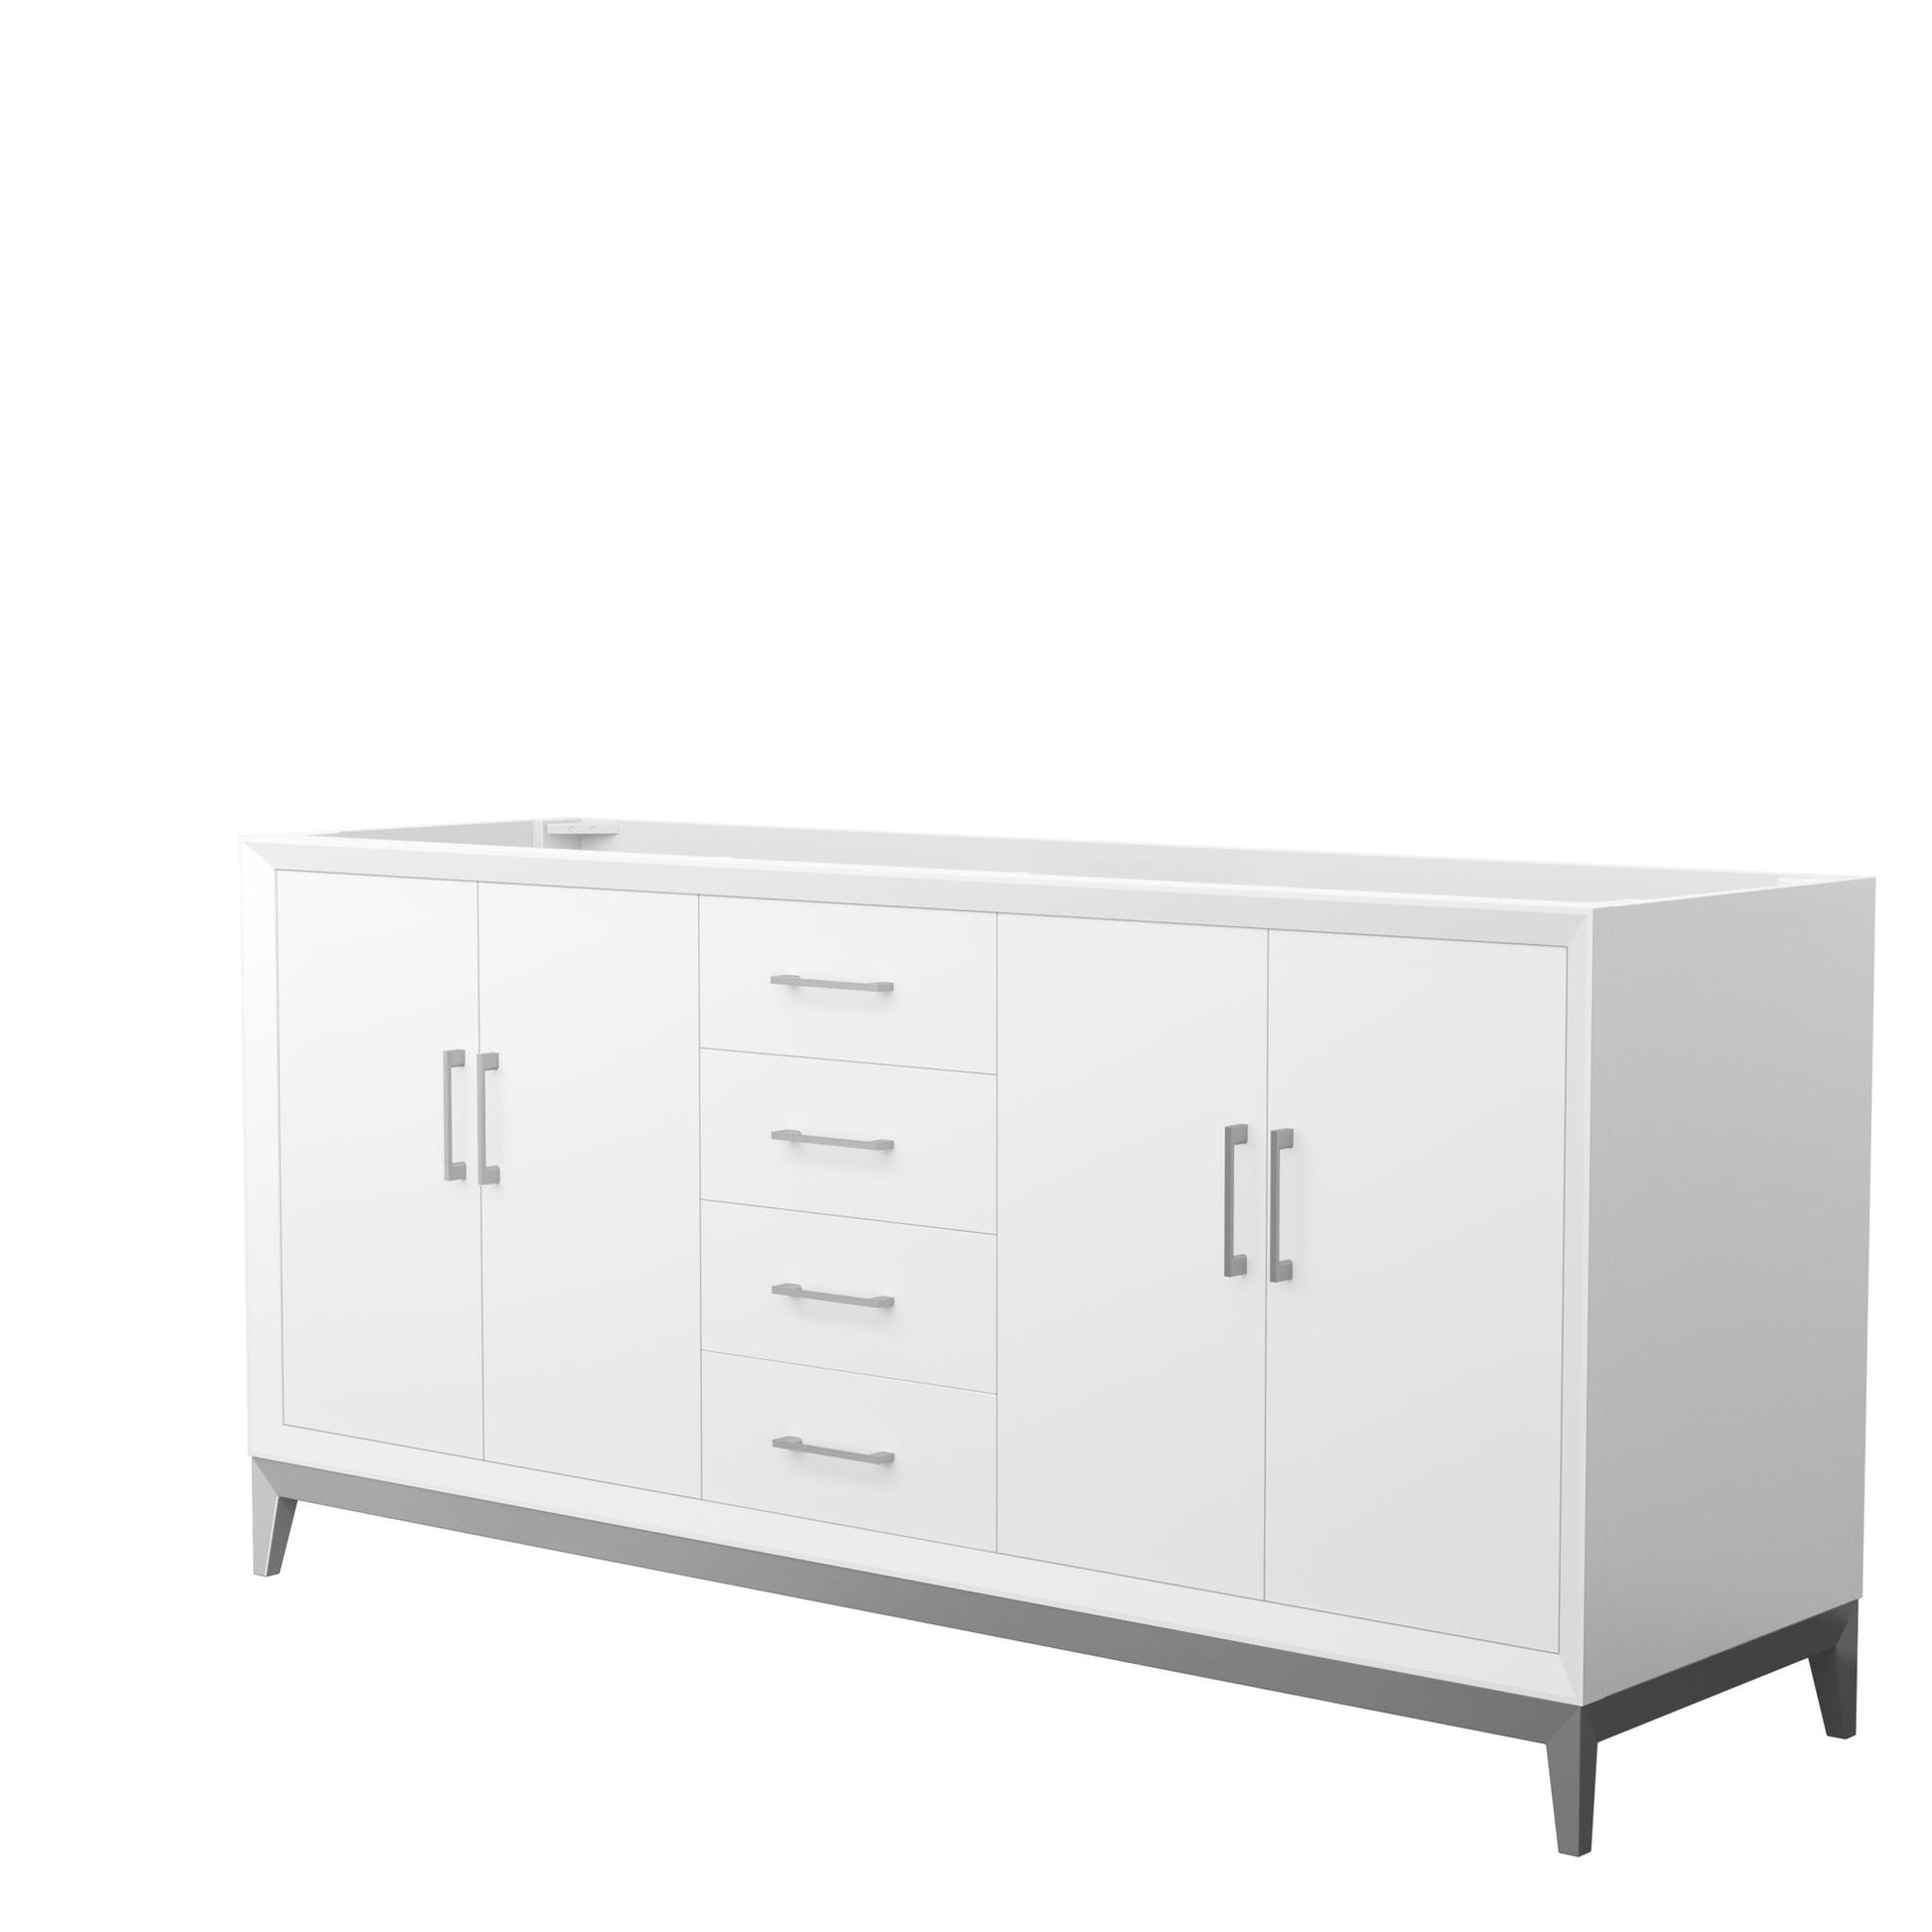 Wyndham Collection Amici 72" Double Bathroom Vanity in White, No Countertop, No Sink, Brushed Nickel Trim